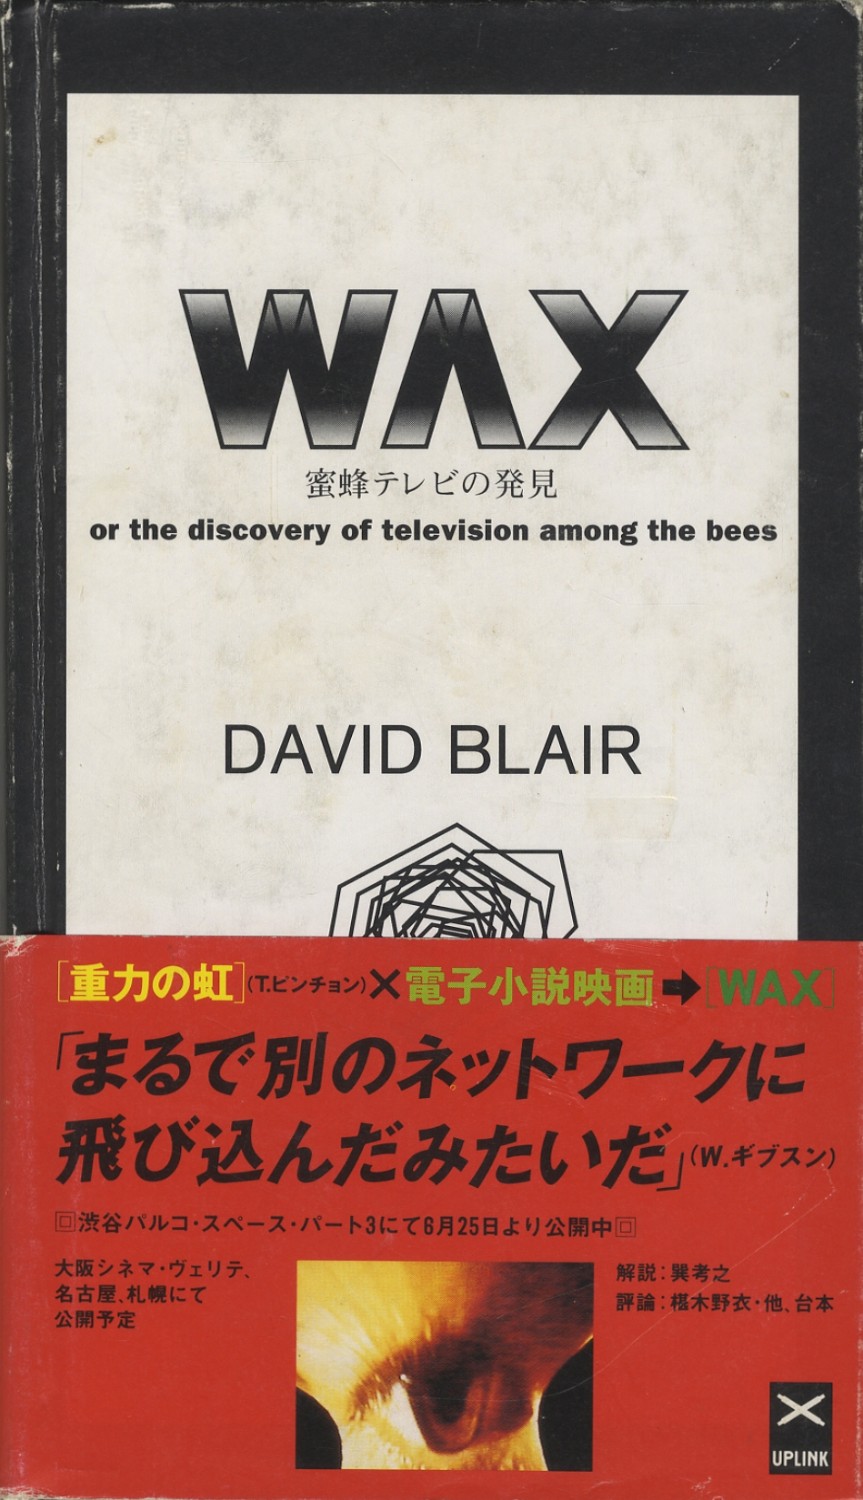 Wax or the Discovery of Television Among the Bees　蜜蜂テレビの発見［image1］